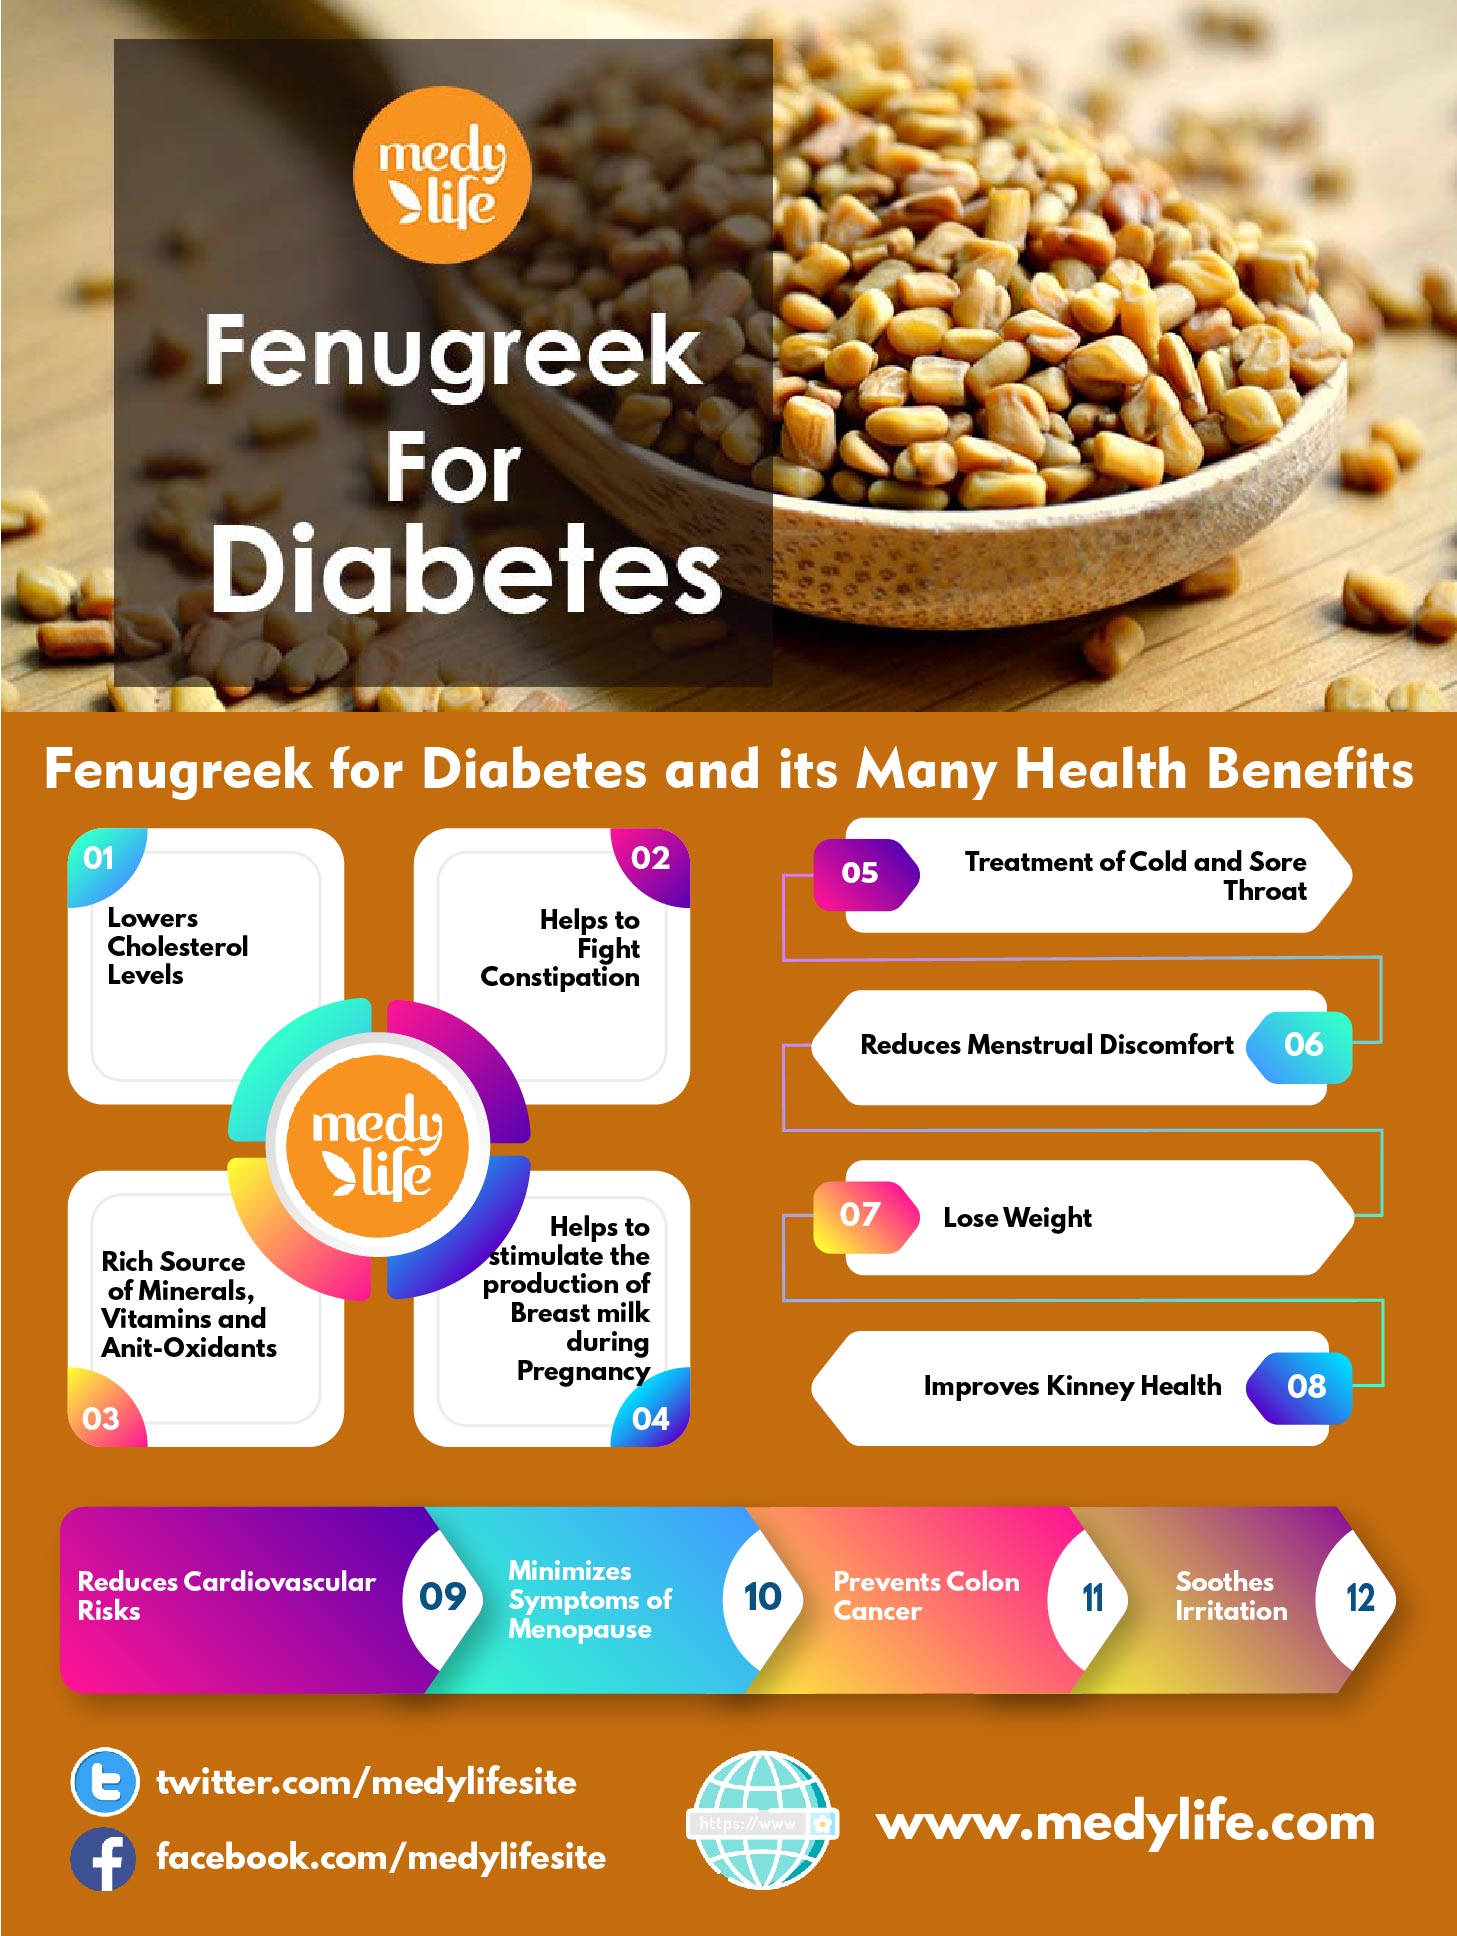 Fenugreek for Diabetes and its Many Health Benefits INFO